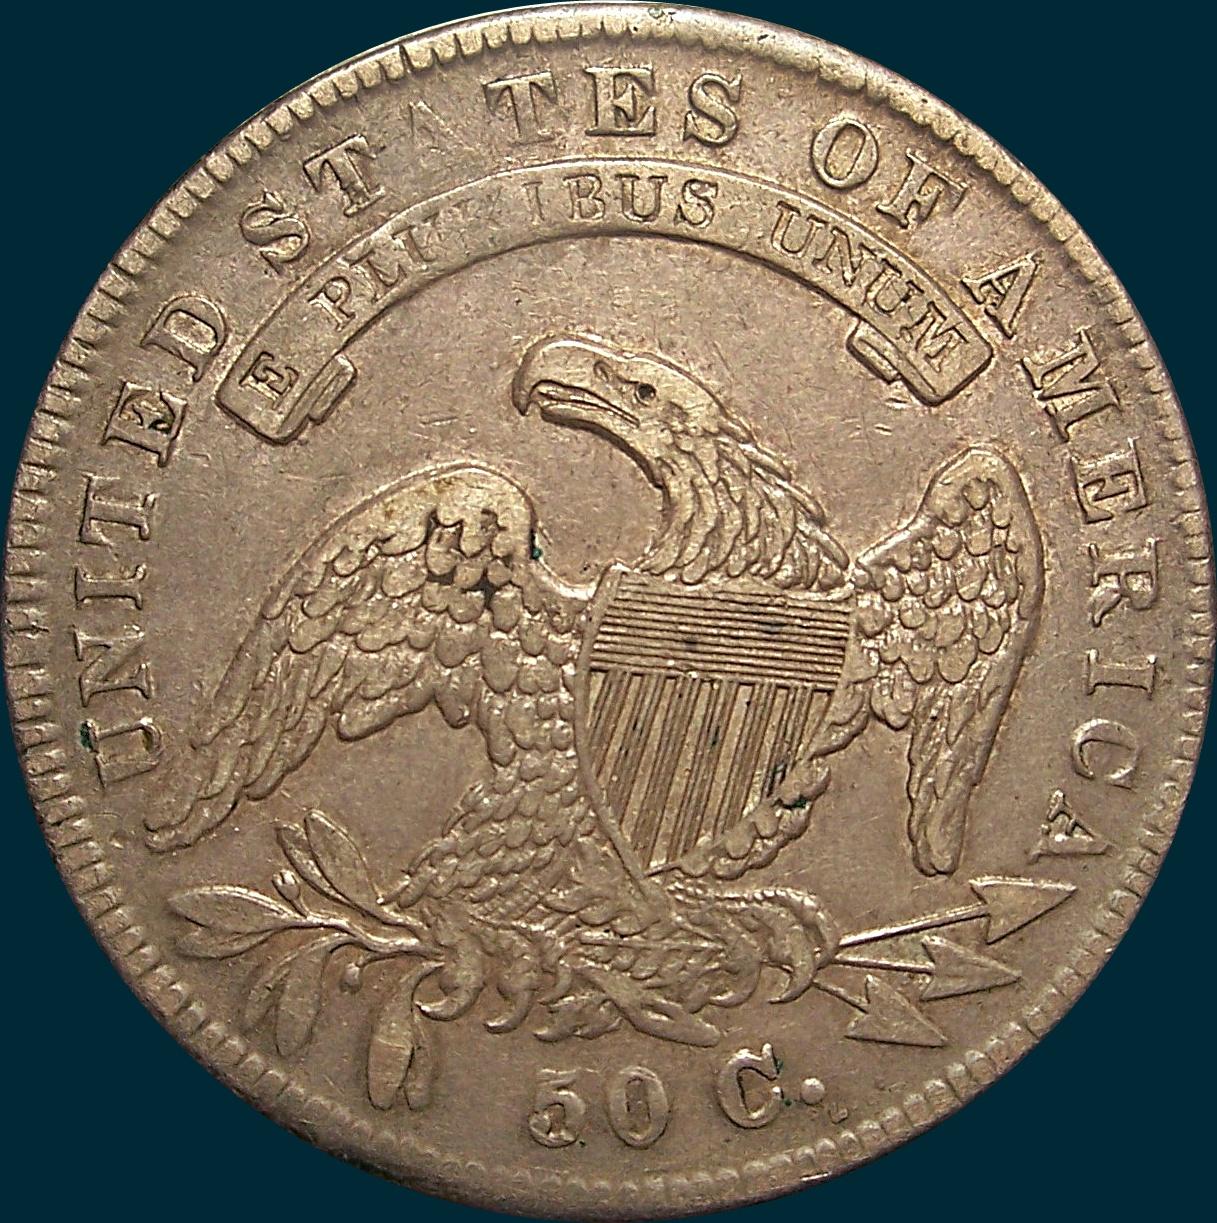 1834, O-116, Small Date, Small Letters, Capped Bust, Half Dollar